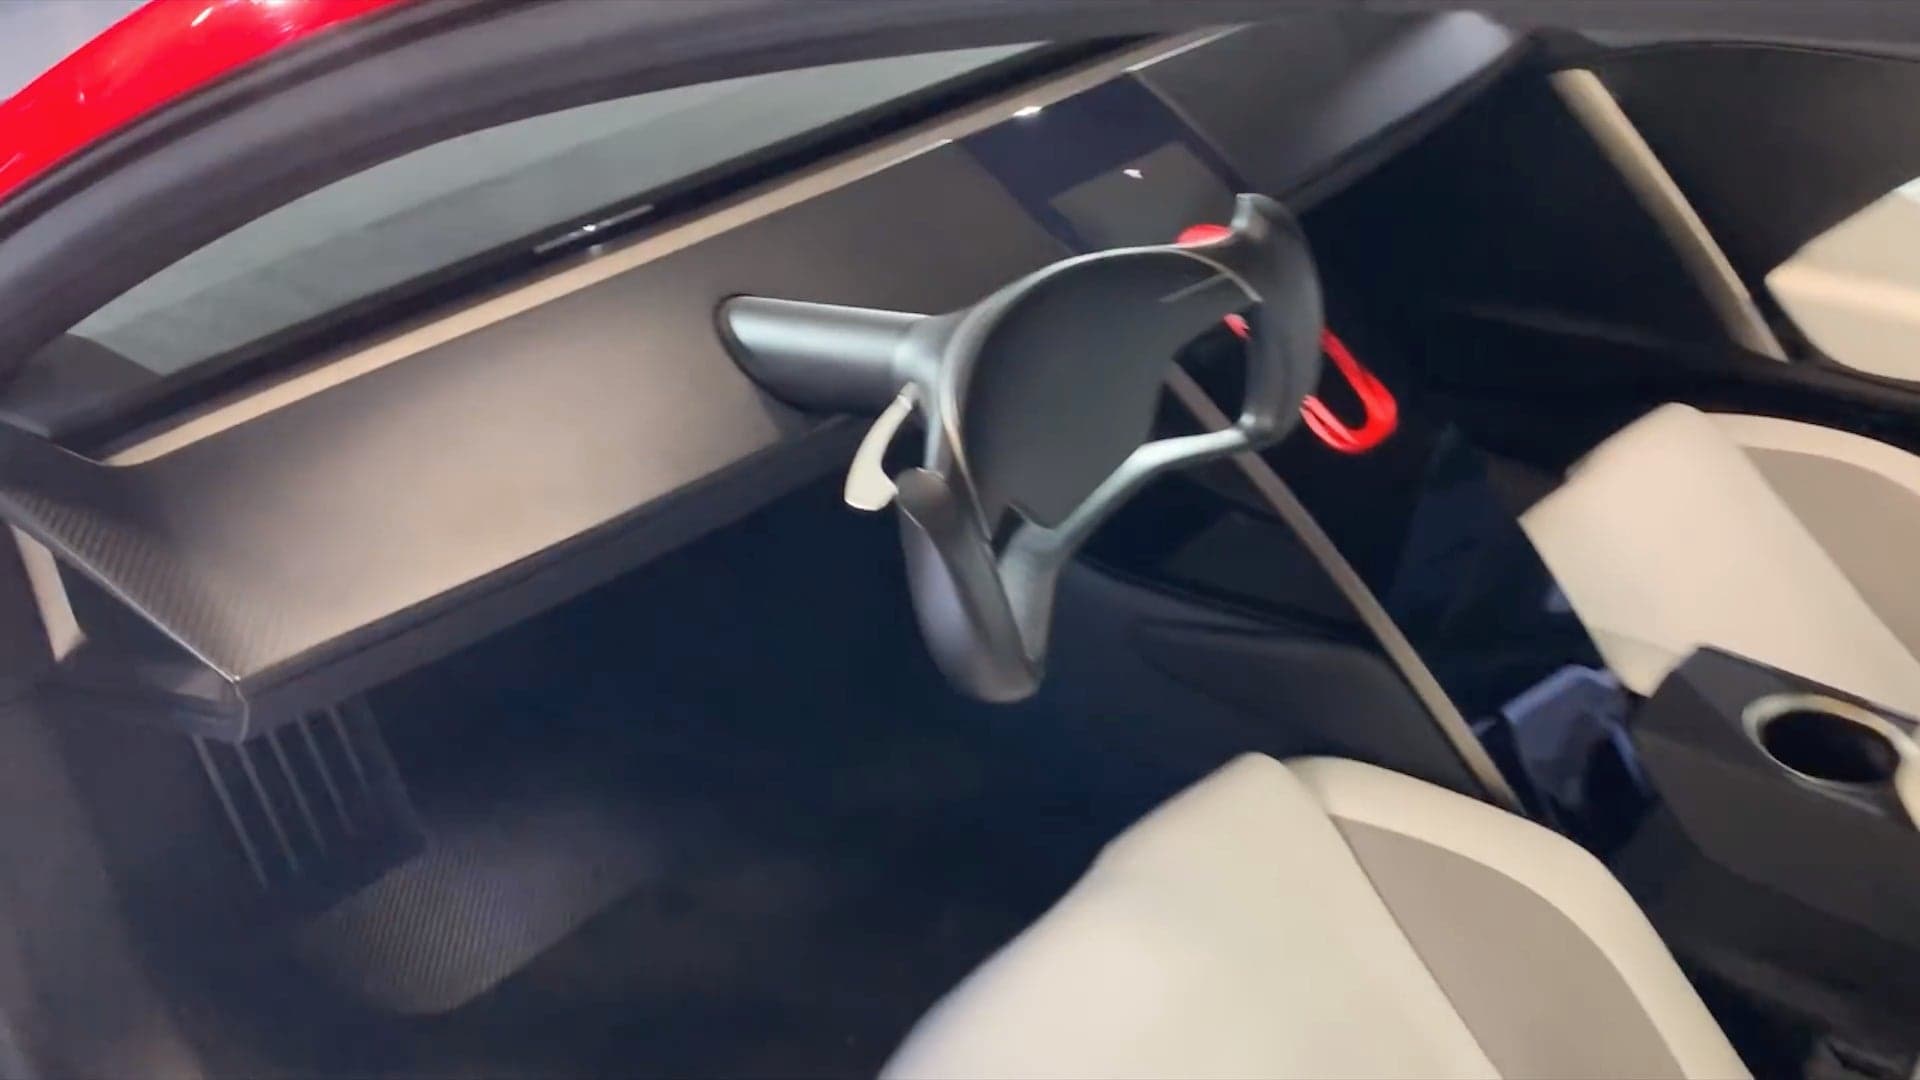 Take a Peek Inside the Upcoming Tesla Roadster Hyper EV With This Spy Video